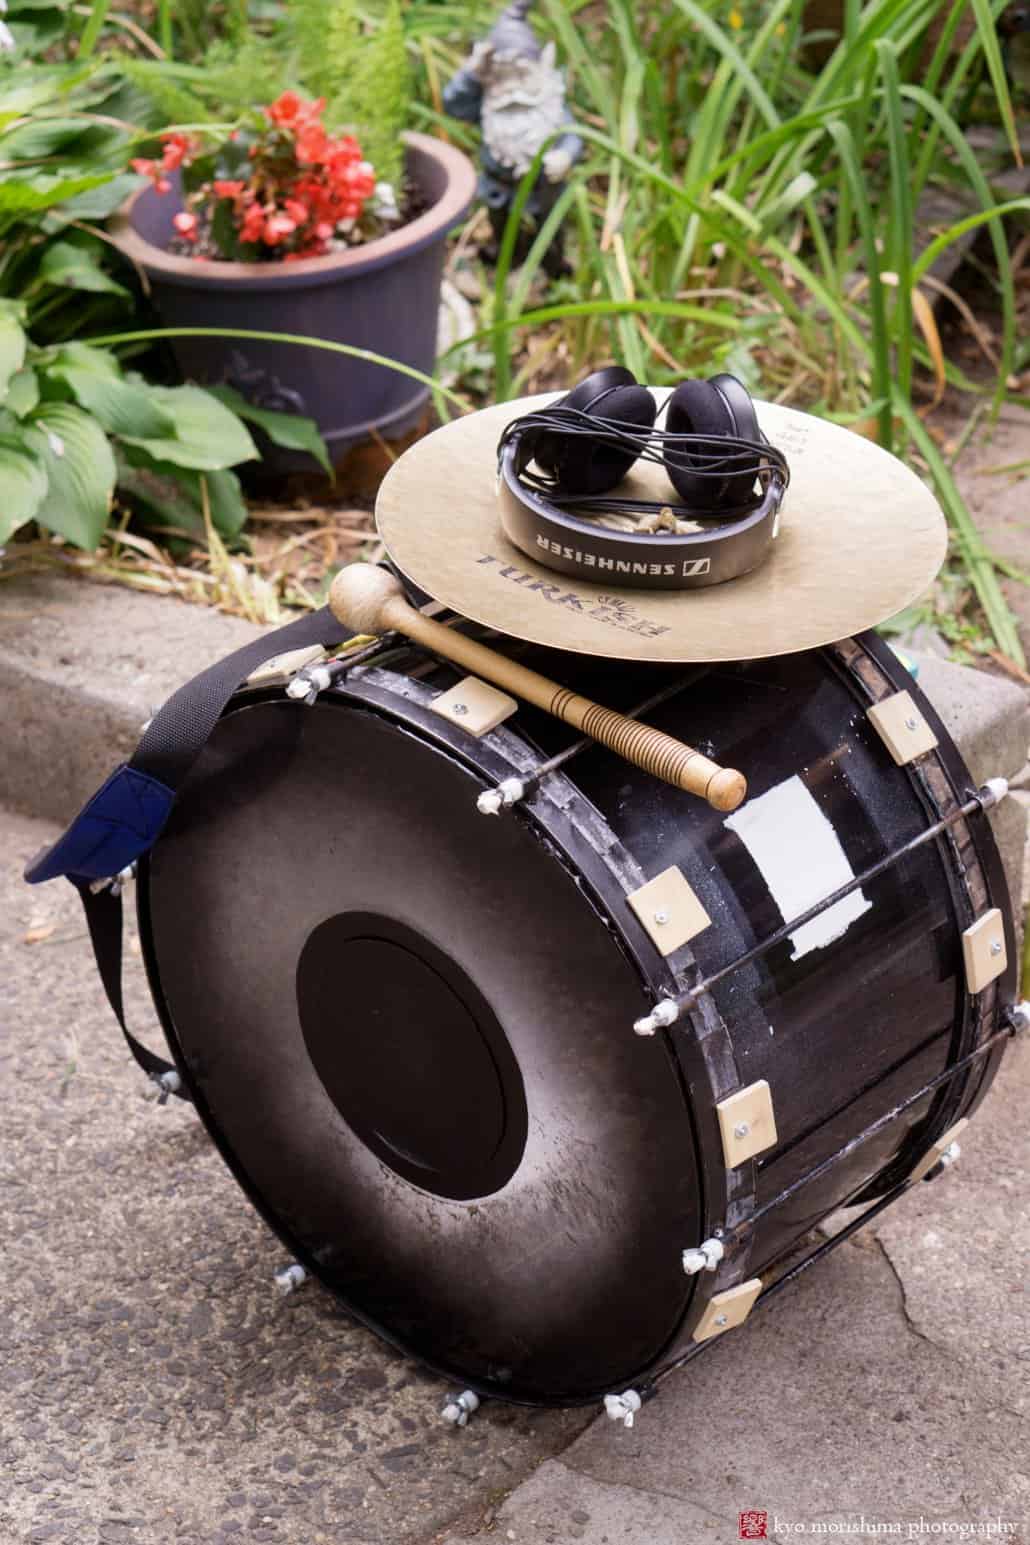 Drum with headphones neatly stashed on top, photographed by Kyo Morishima